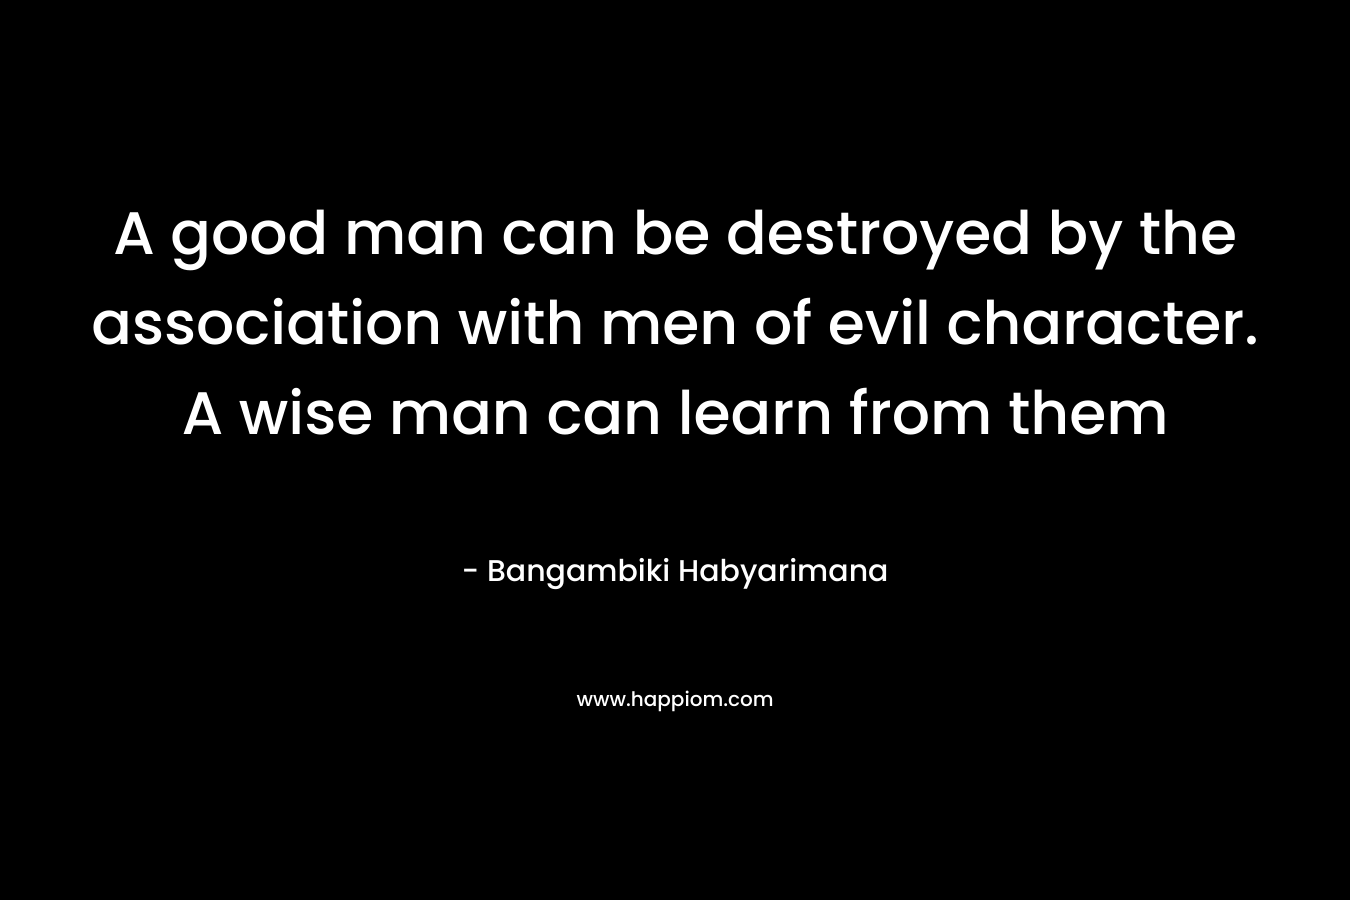 A good man can be destroyed by the association with men of evil character. A wise man can learn from them